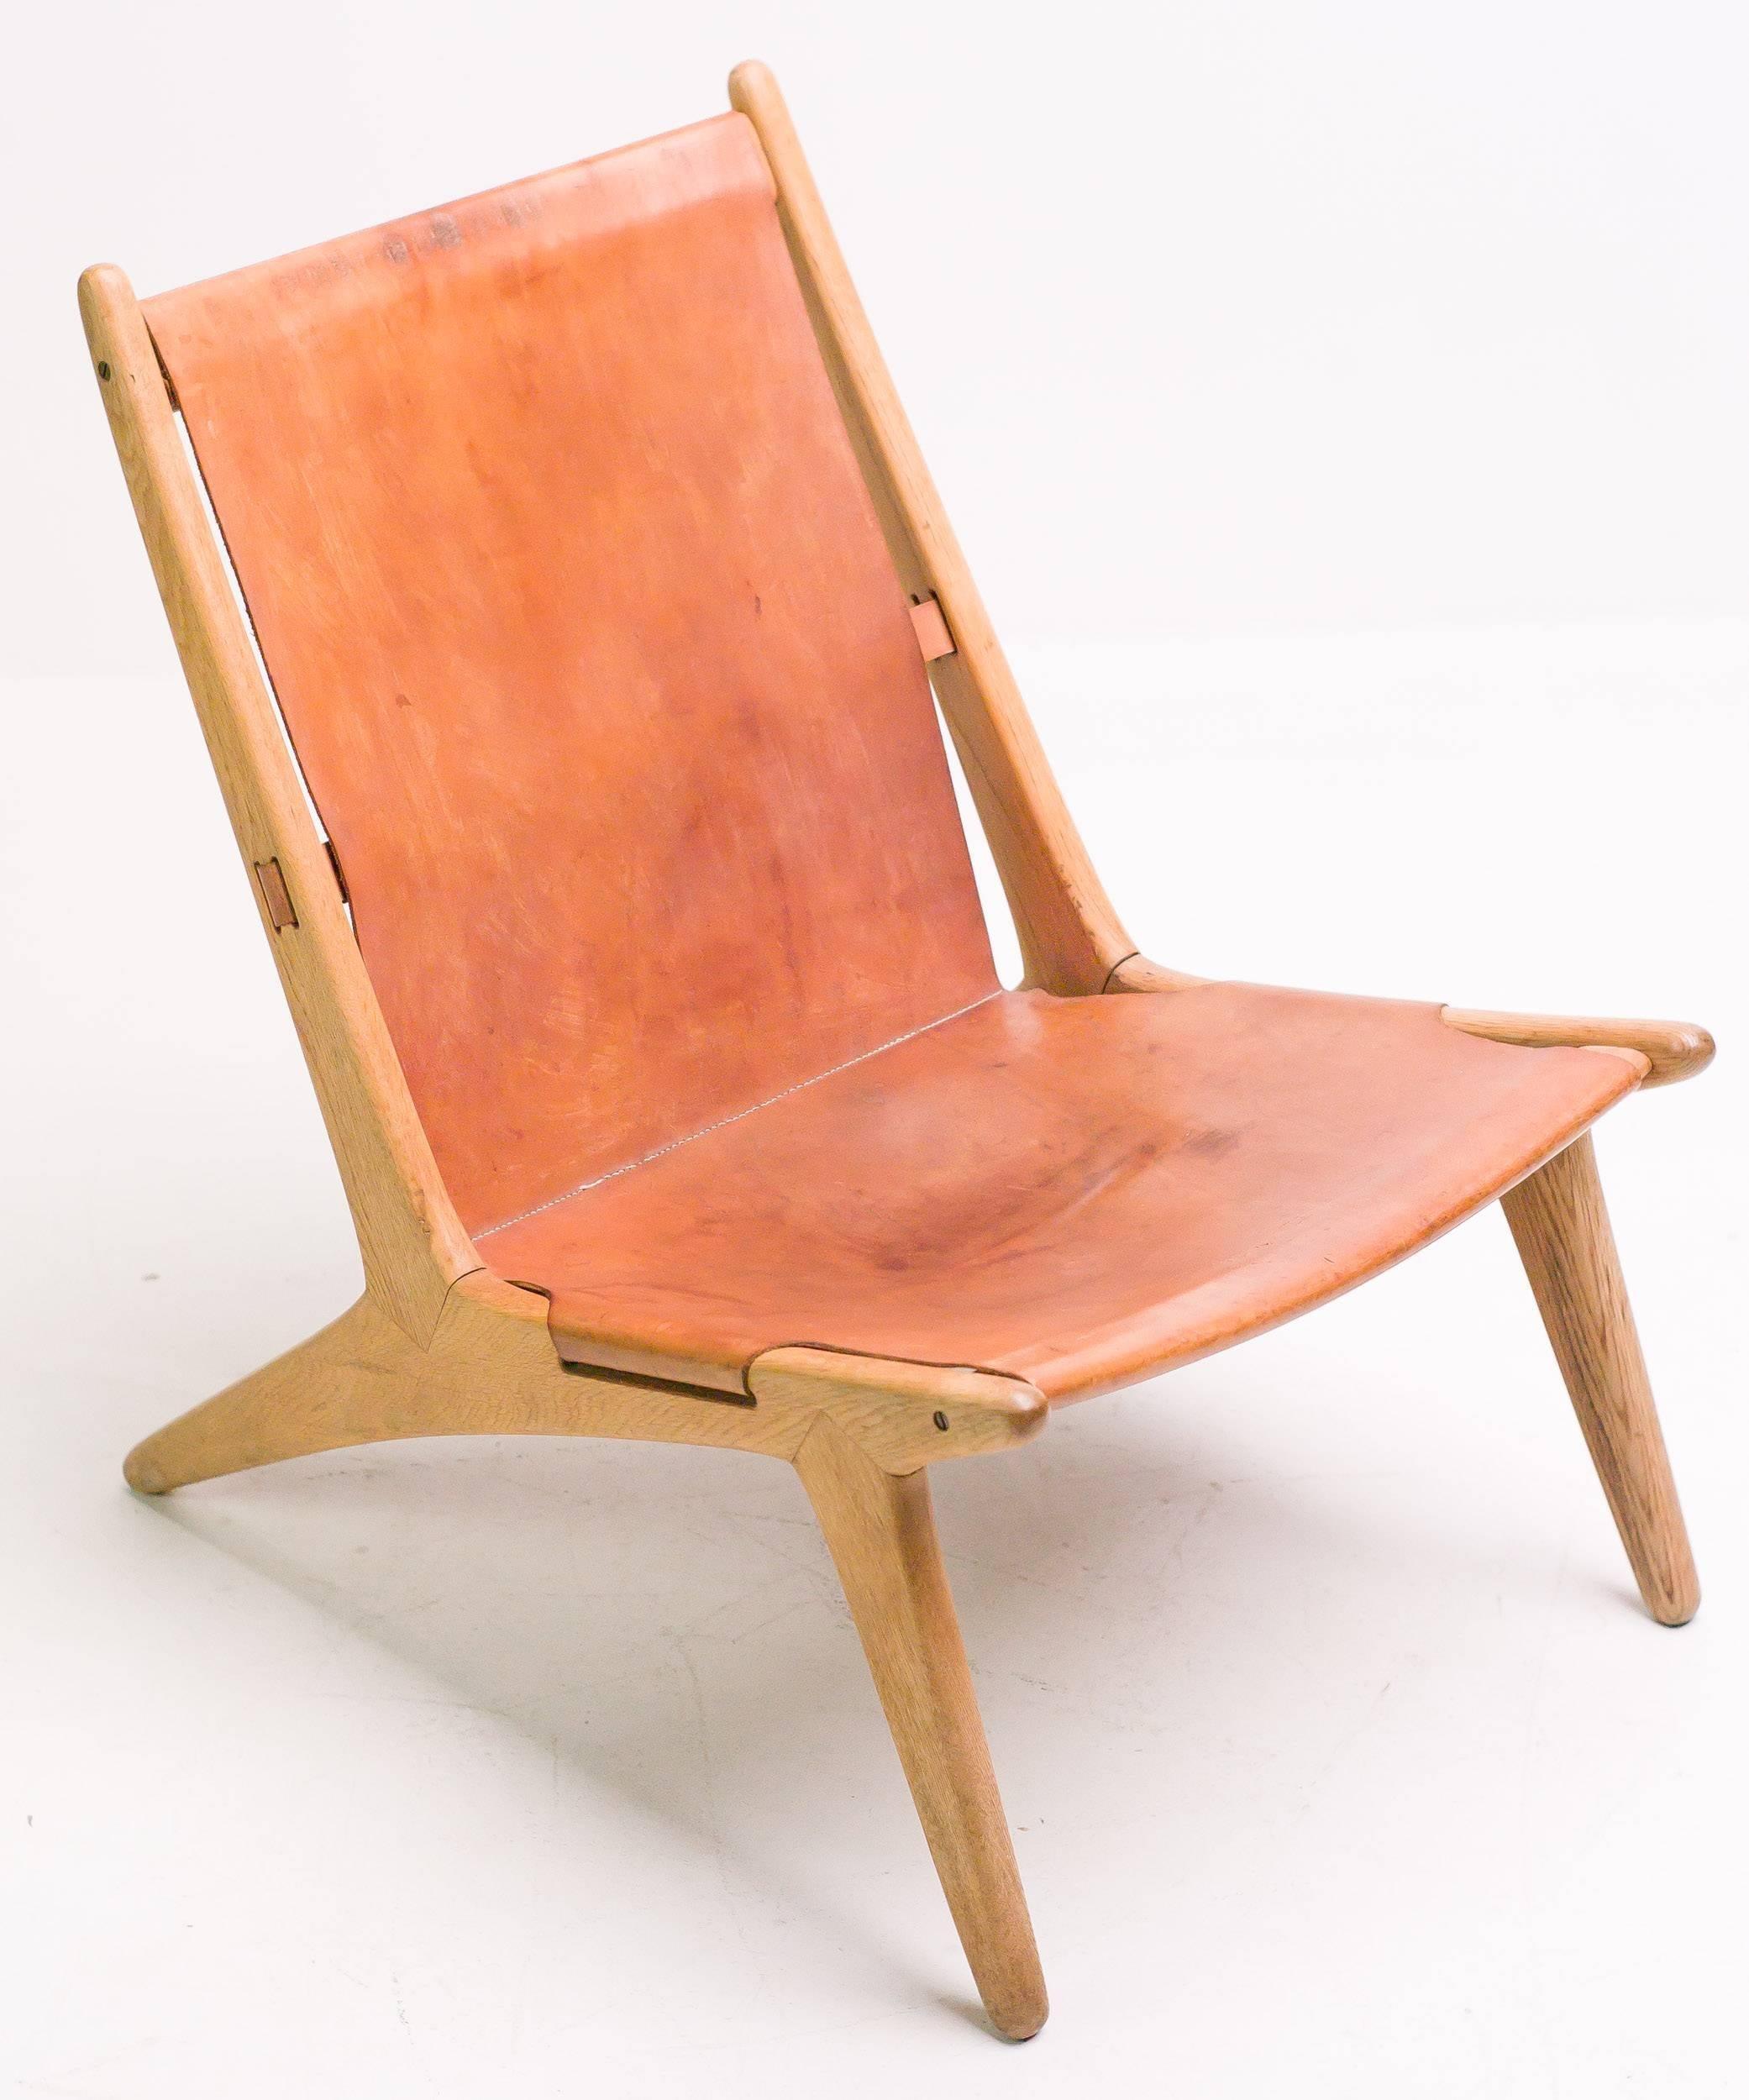 Hunting chairs designed by Uno & Osten Kristiansson for Vittsjömöbel, in beautifully aged original natural saddle leather and oak. Marked with label.

Excellent fast and affordable worldwide shipping.
White glove delivery available upon request.